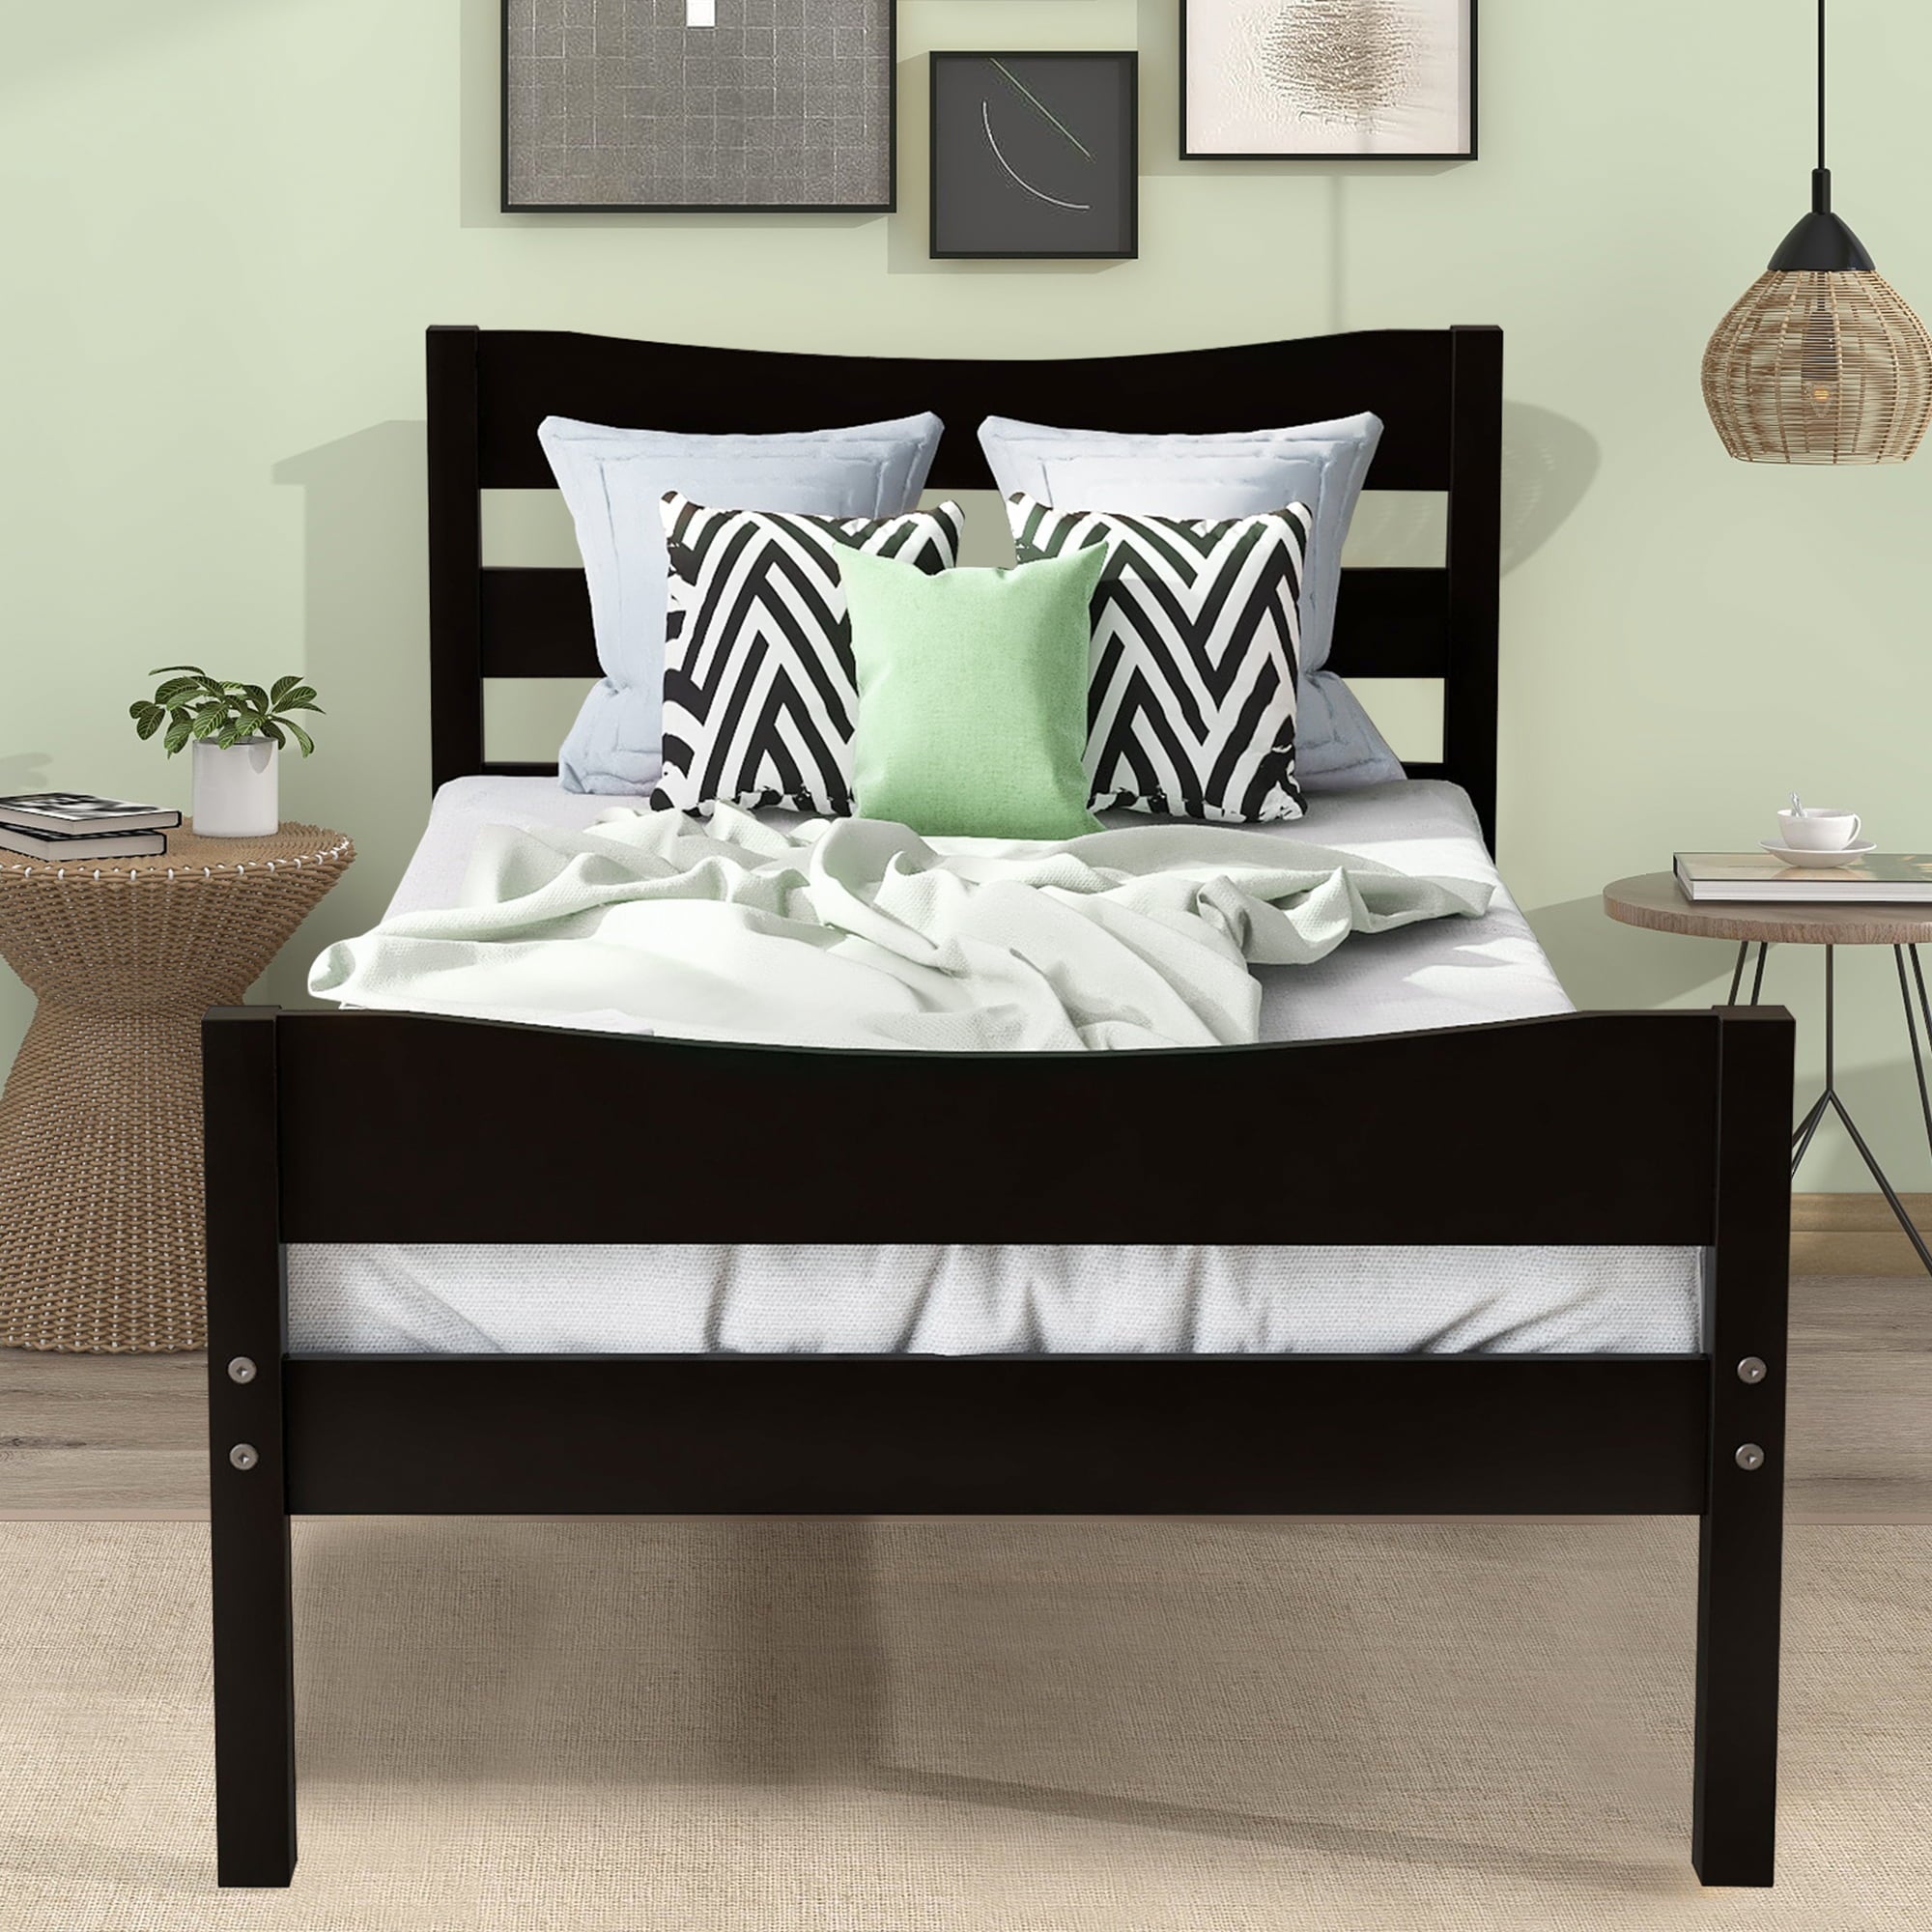 BTMWAY Wood Twin Bed Frame for Kids Adults, Solid Wood Platform Bed Frame with Headboard and Footboard, Modern Twin Size Bed Frame with Wooden Slats Support, No Box Spring Needed, Espresso